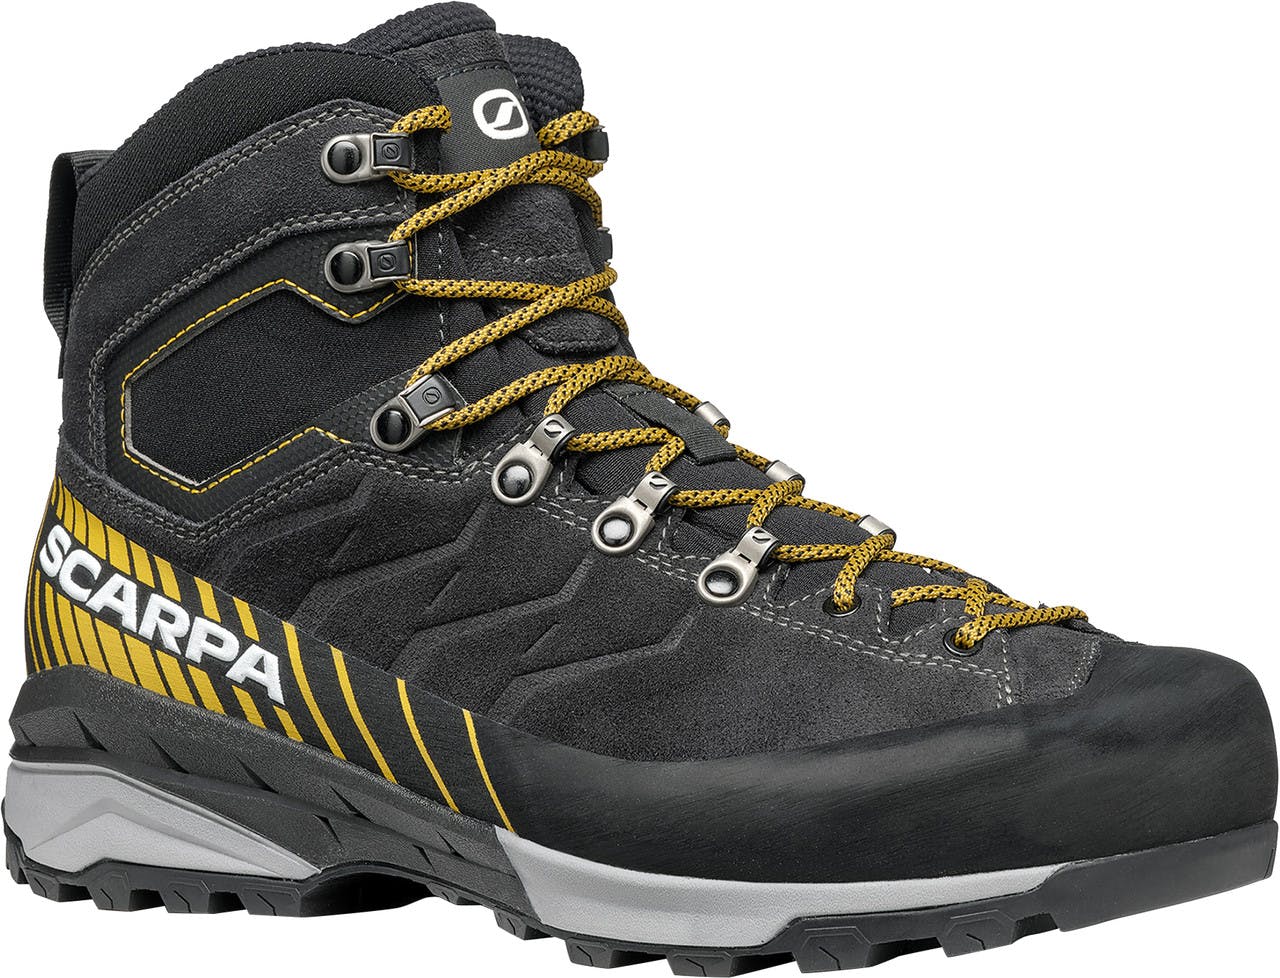 Mescalito Trk Gore-Tex Backpacking Boots Dark Anthracite/Mustard